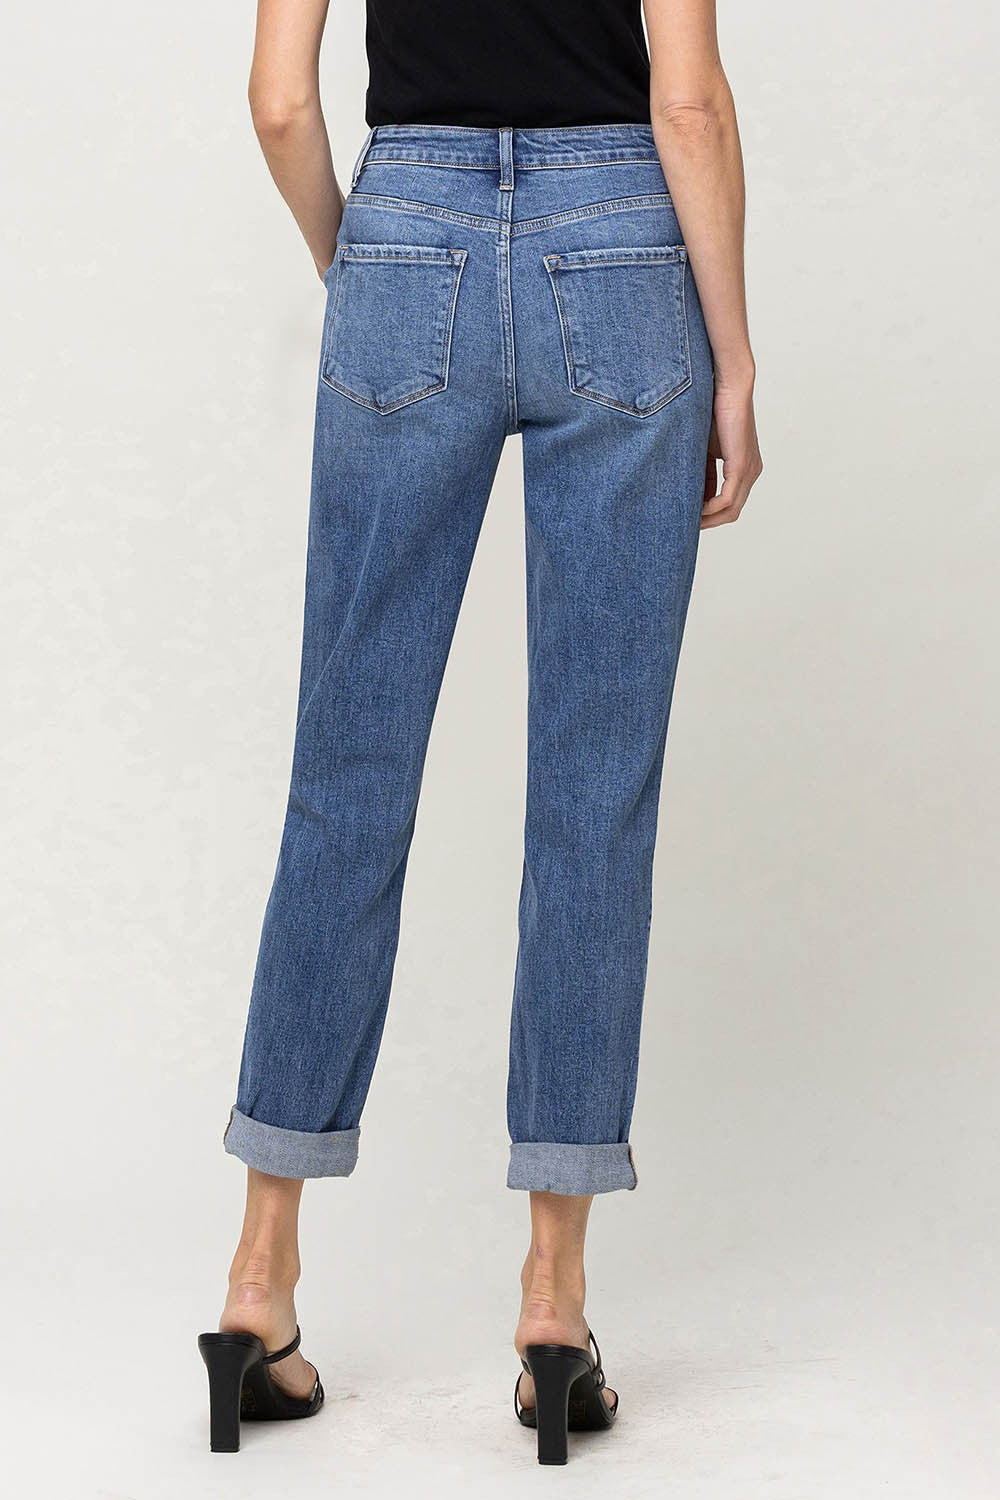 Stretch Mom Jean - Ease